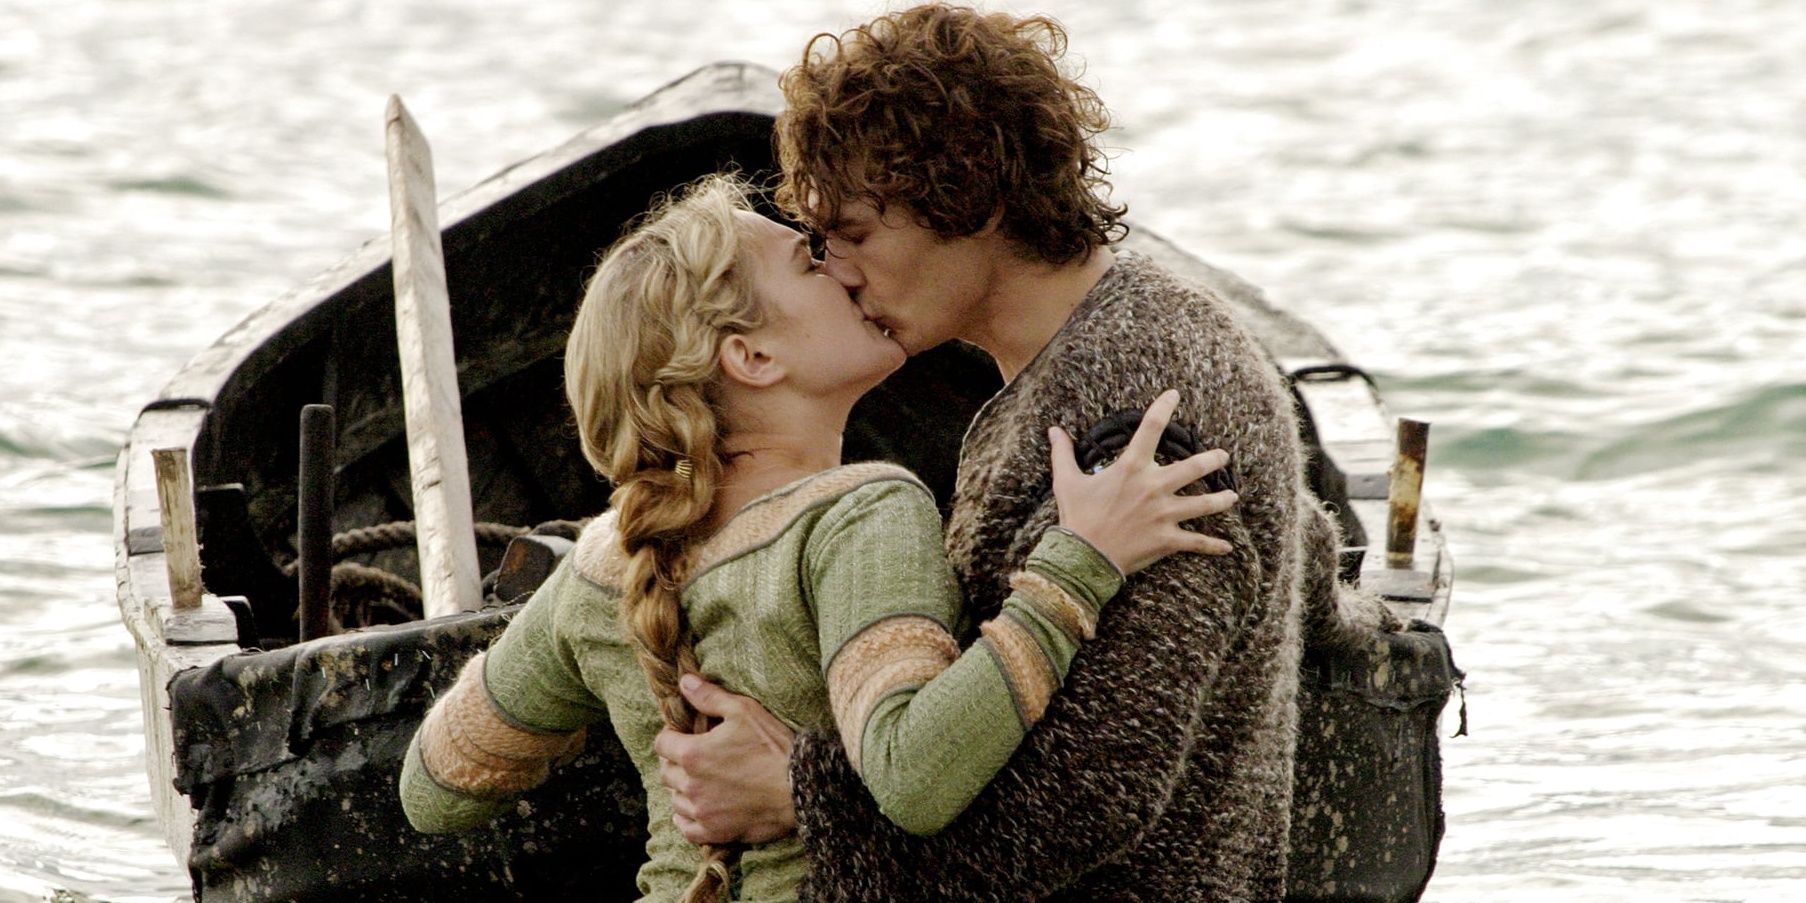 A man and a woman kiss as they stand by a small rowboat by the sea.